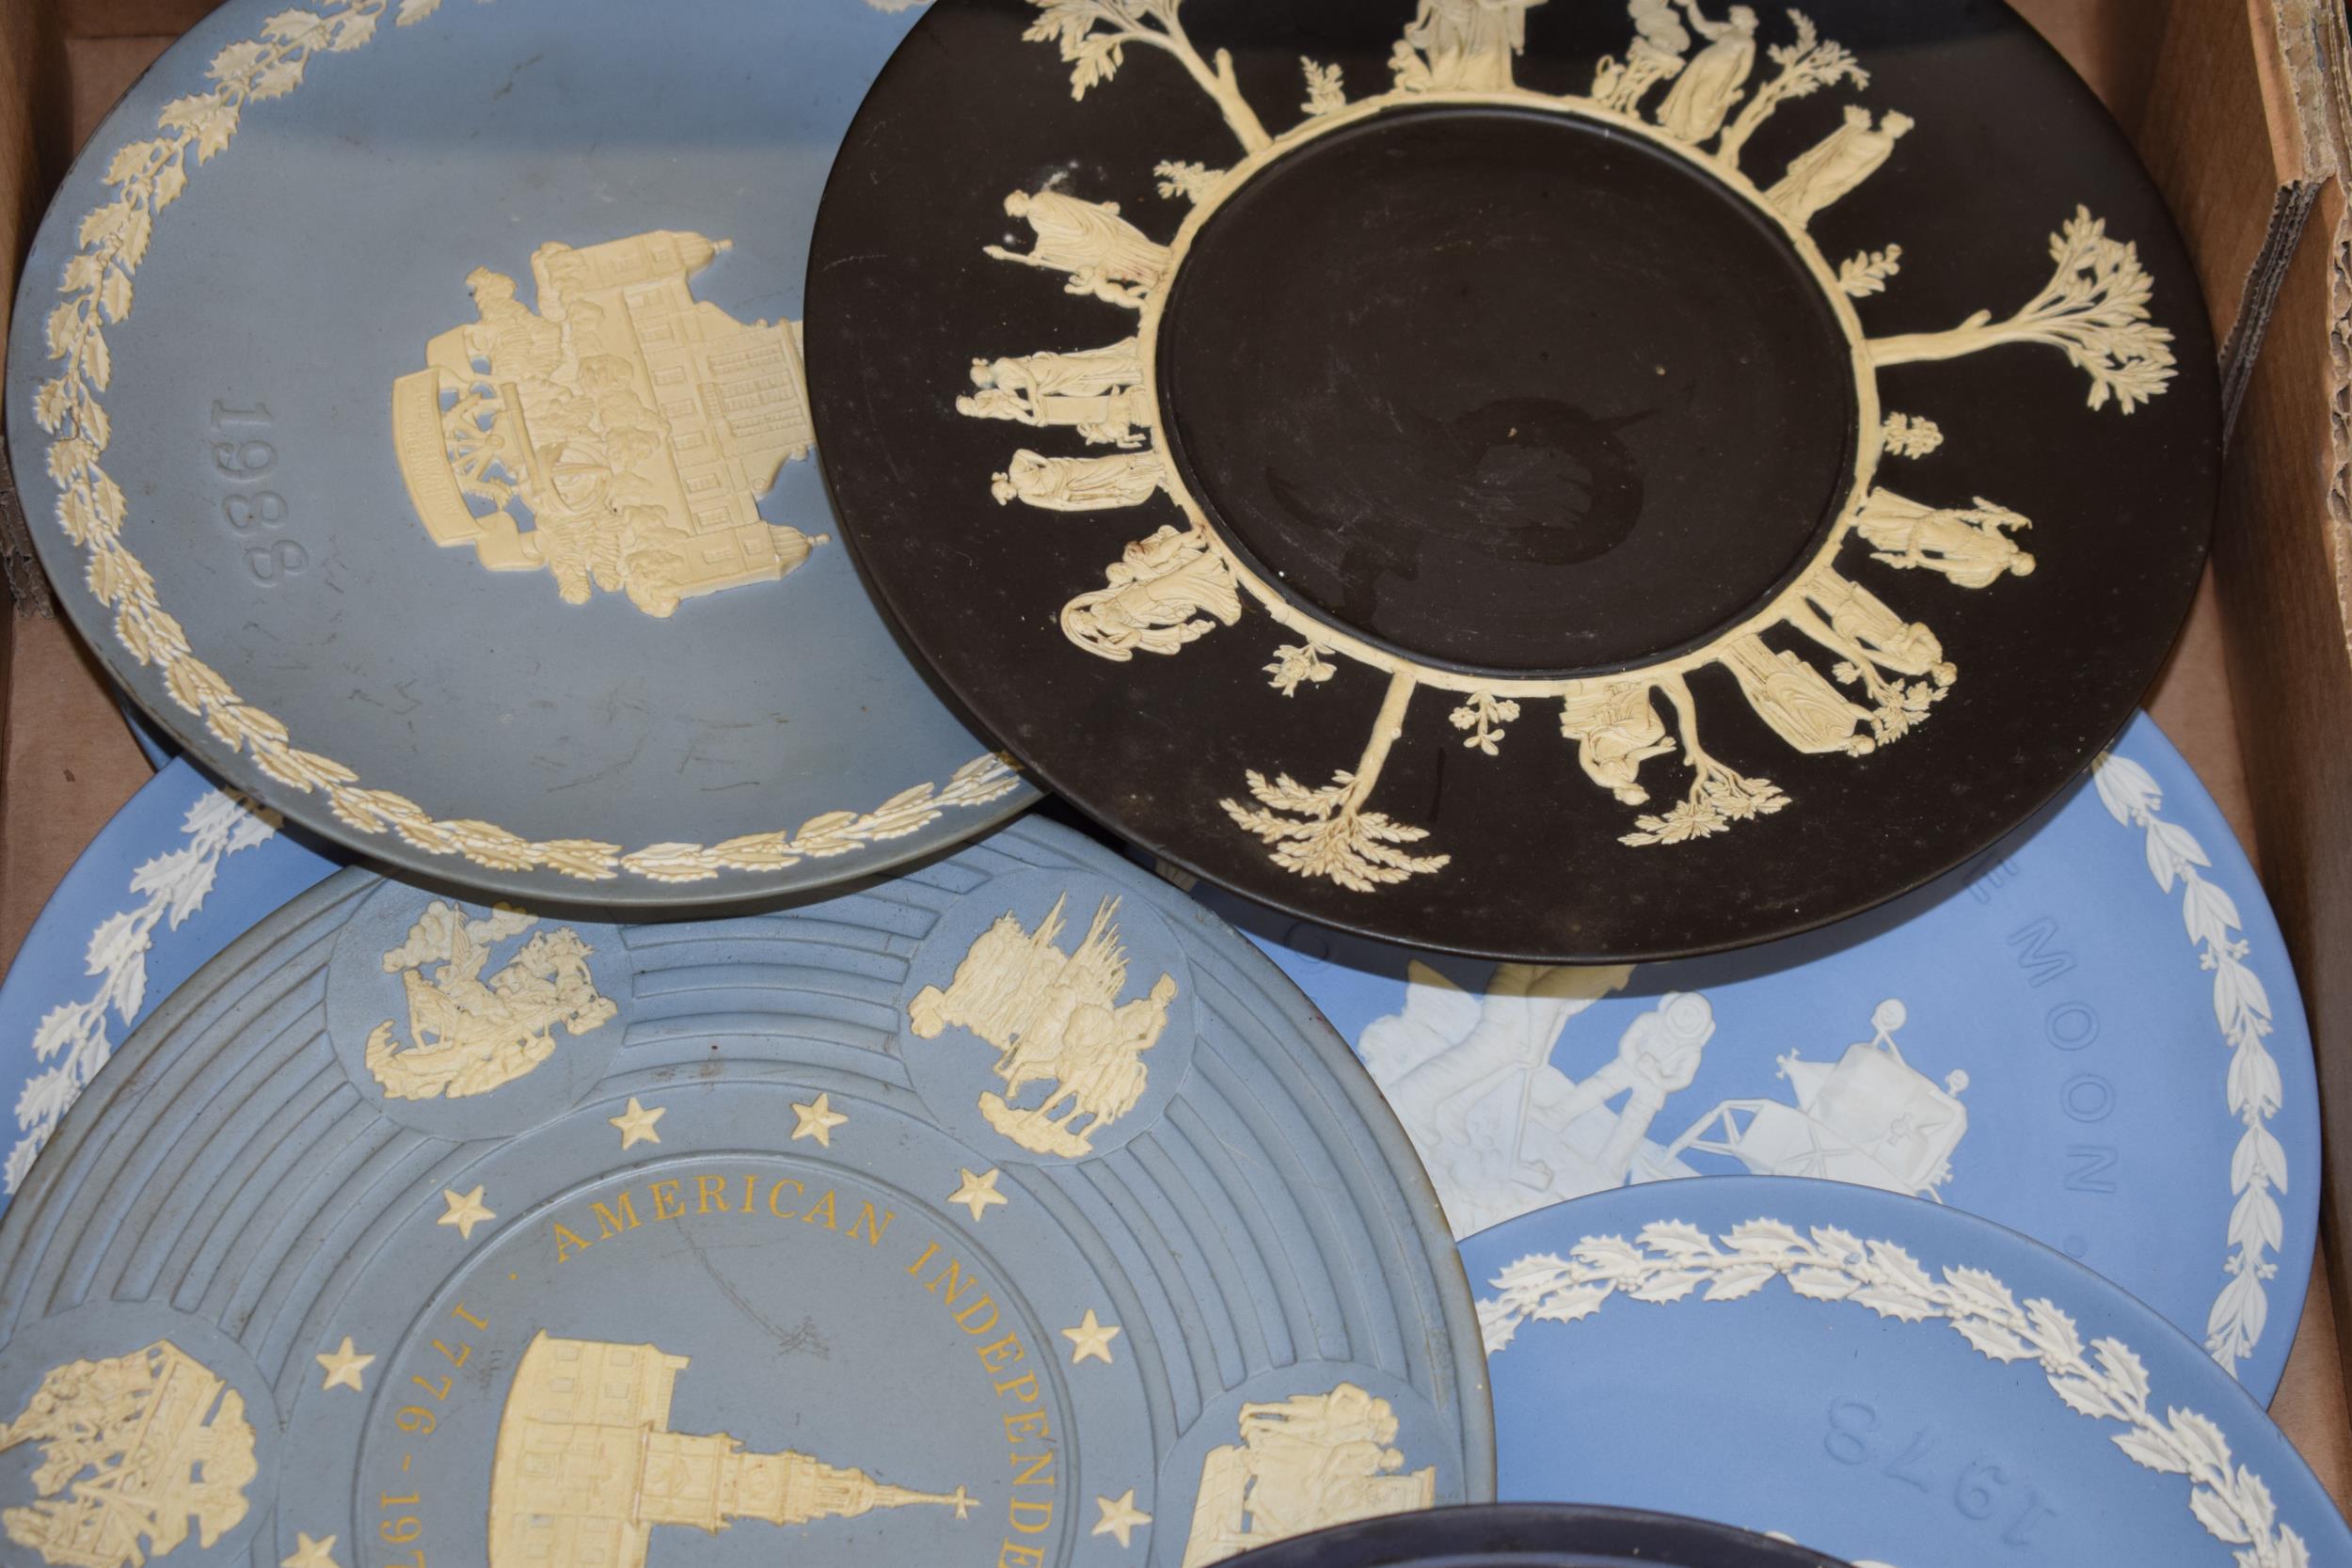 Wedgwood Jasperware plates in colours such as blue, cobalt blue and black in varying patterns and - Image 2 of 4